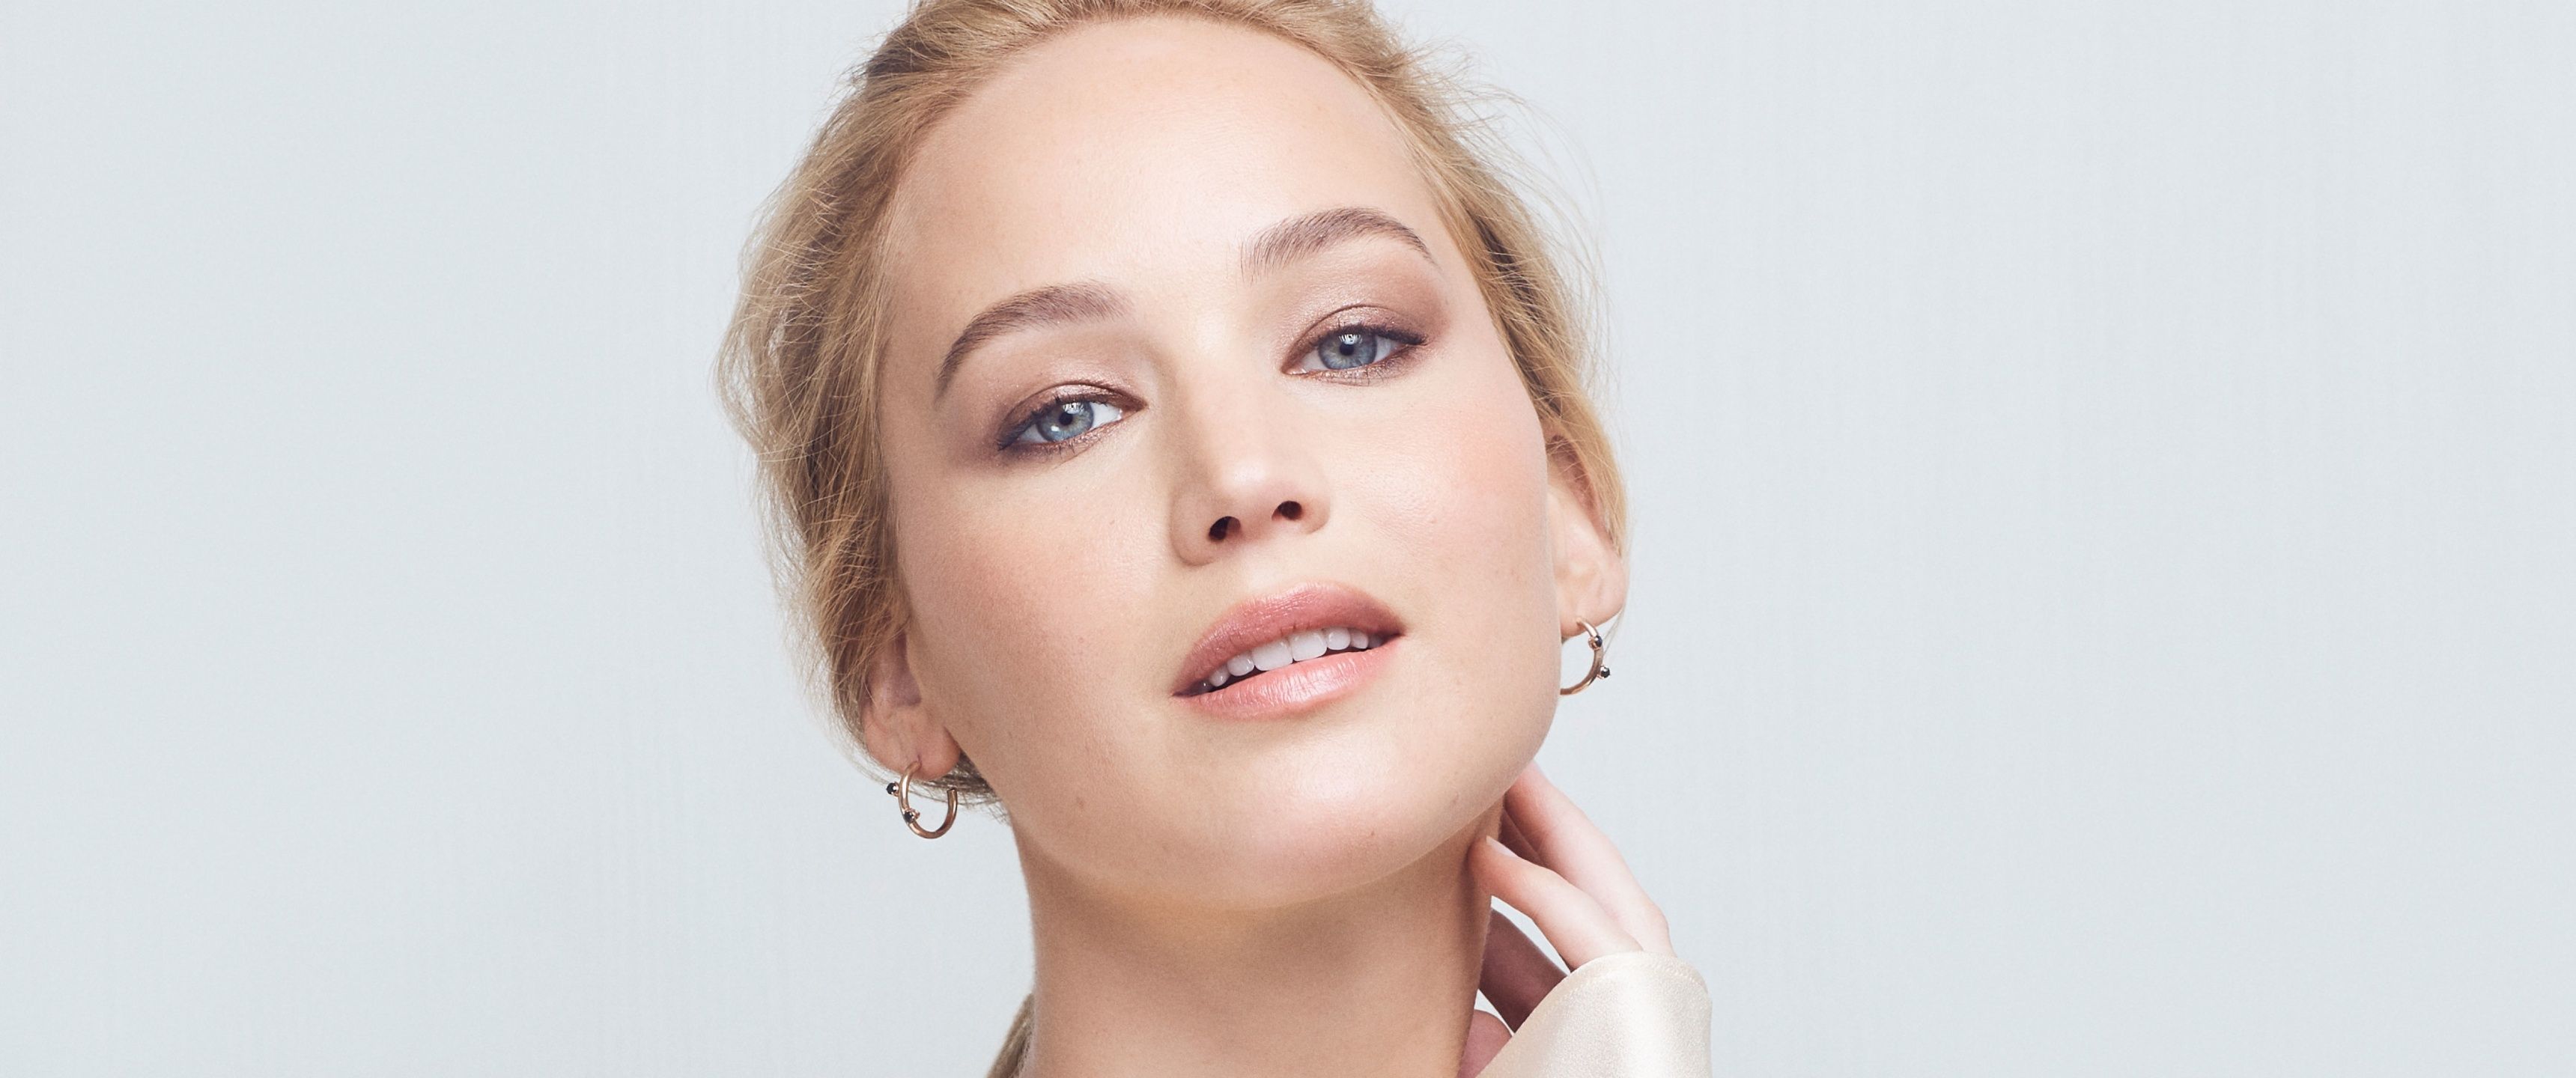 A woman with blonde hair and blue eyes wearing gold earrings. - Jennifer Lawrence